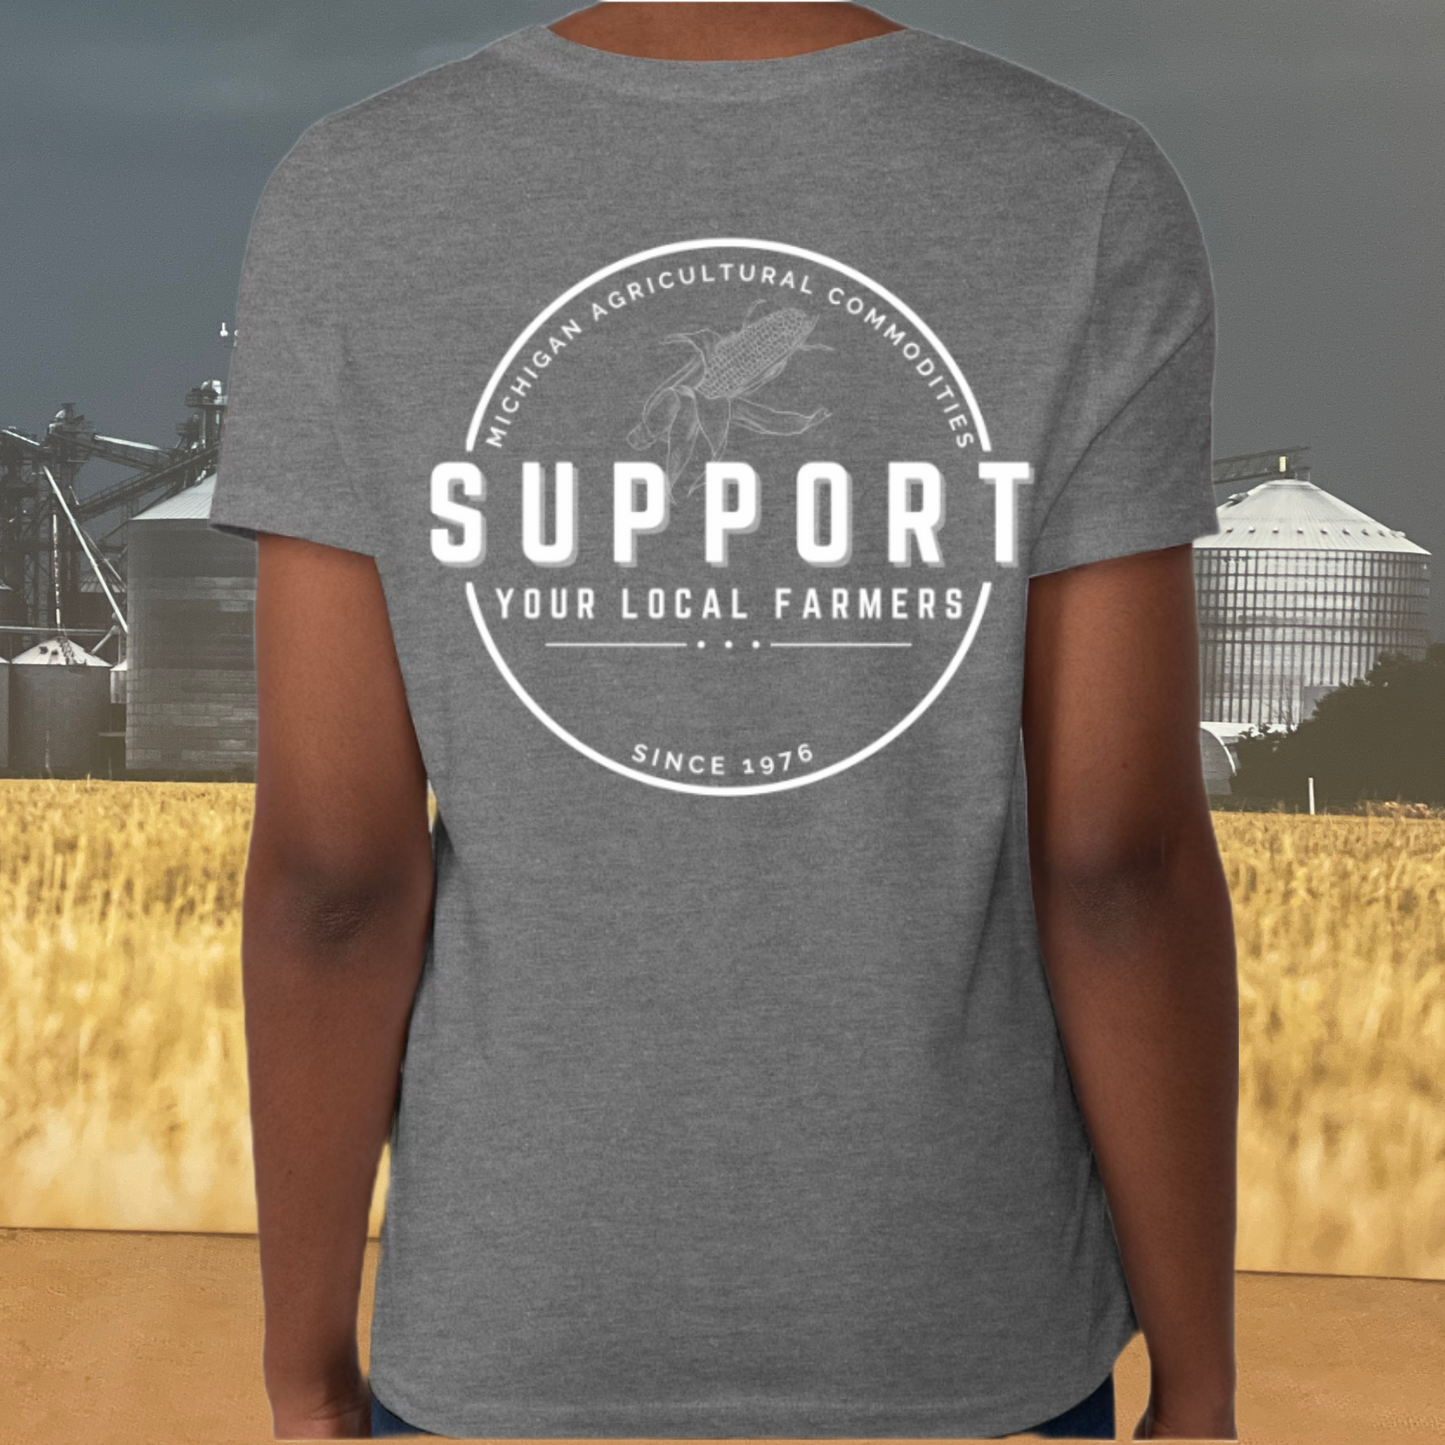 M.A.C. Support Your Local Farmers T-Shirt - DARK HEATHER GRAY